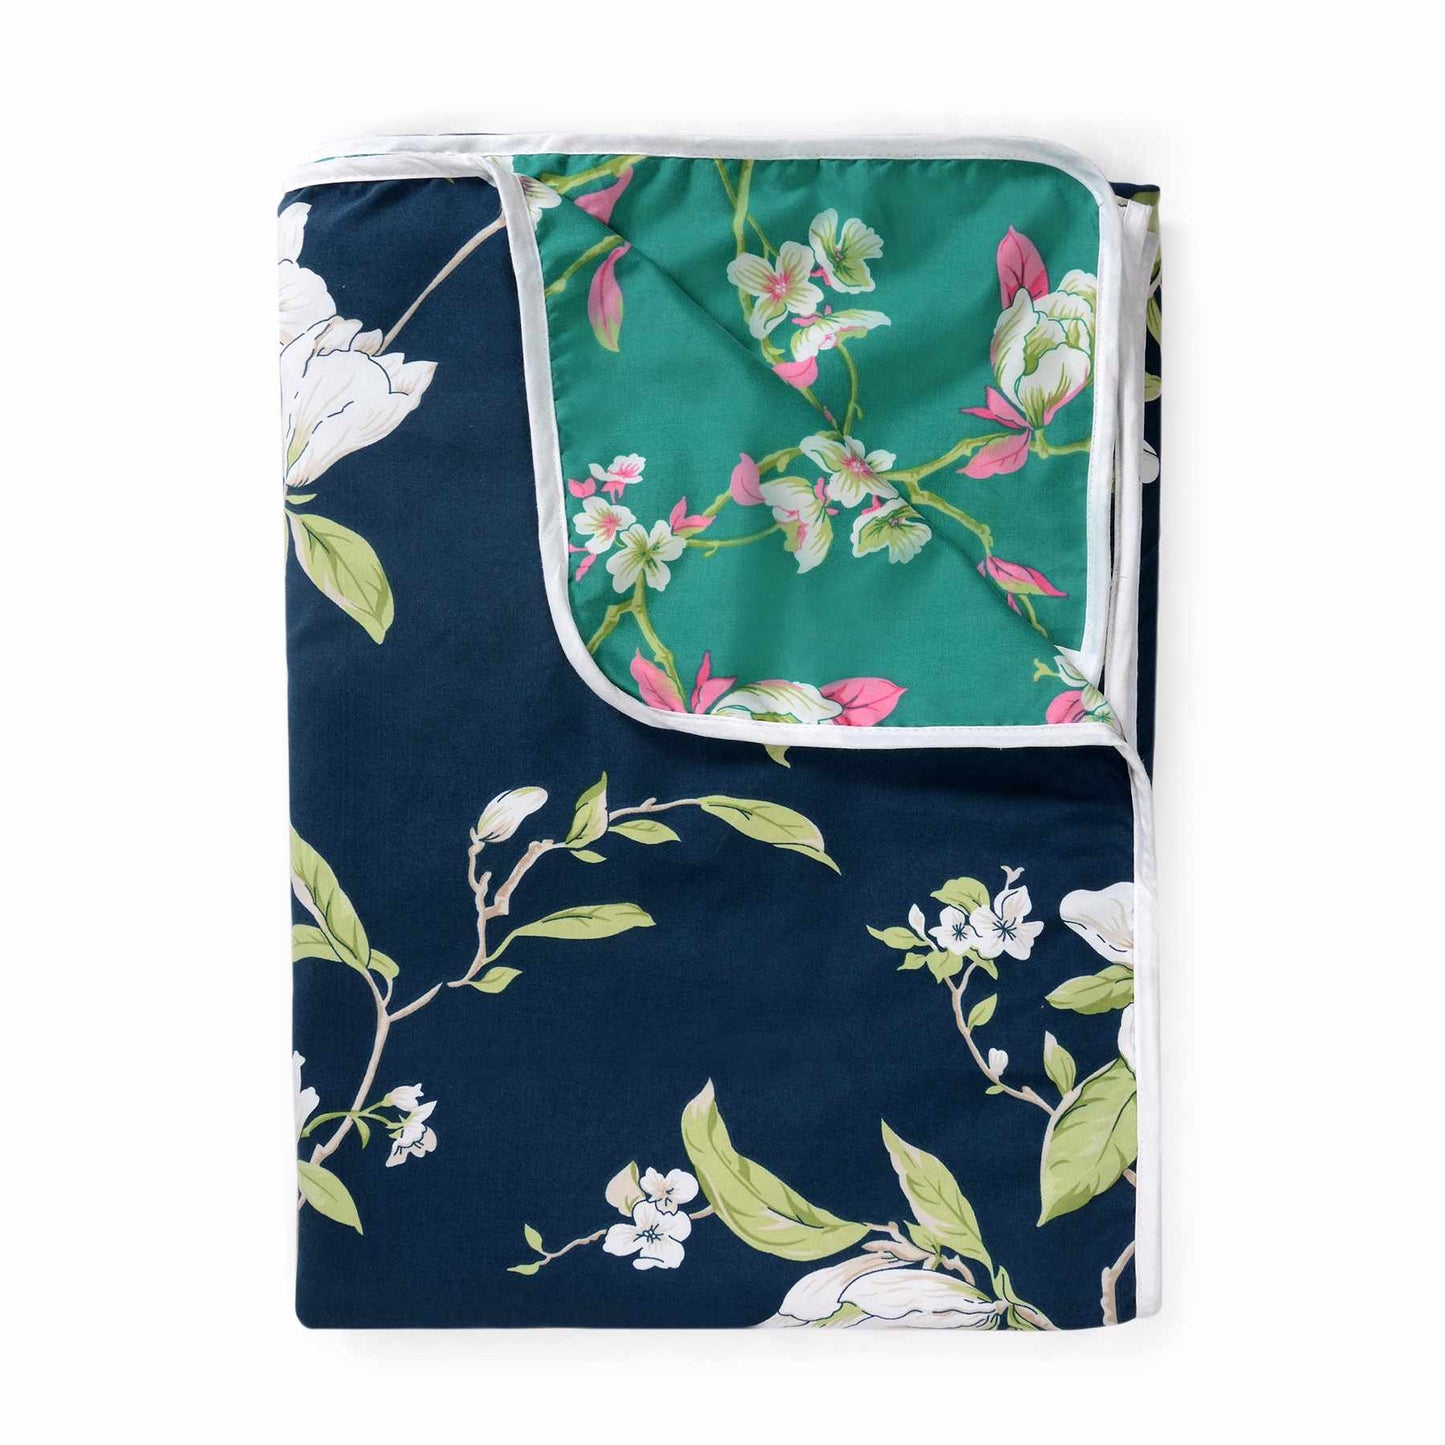 Green and Navy Blue 120 GSM Microfiber Floral Leaf Pattern Double Bed AC Blanket Dohar for All Season